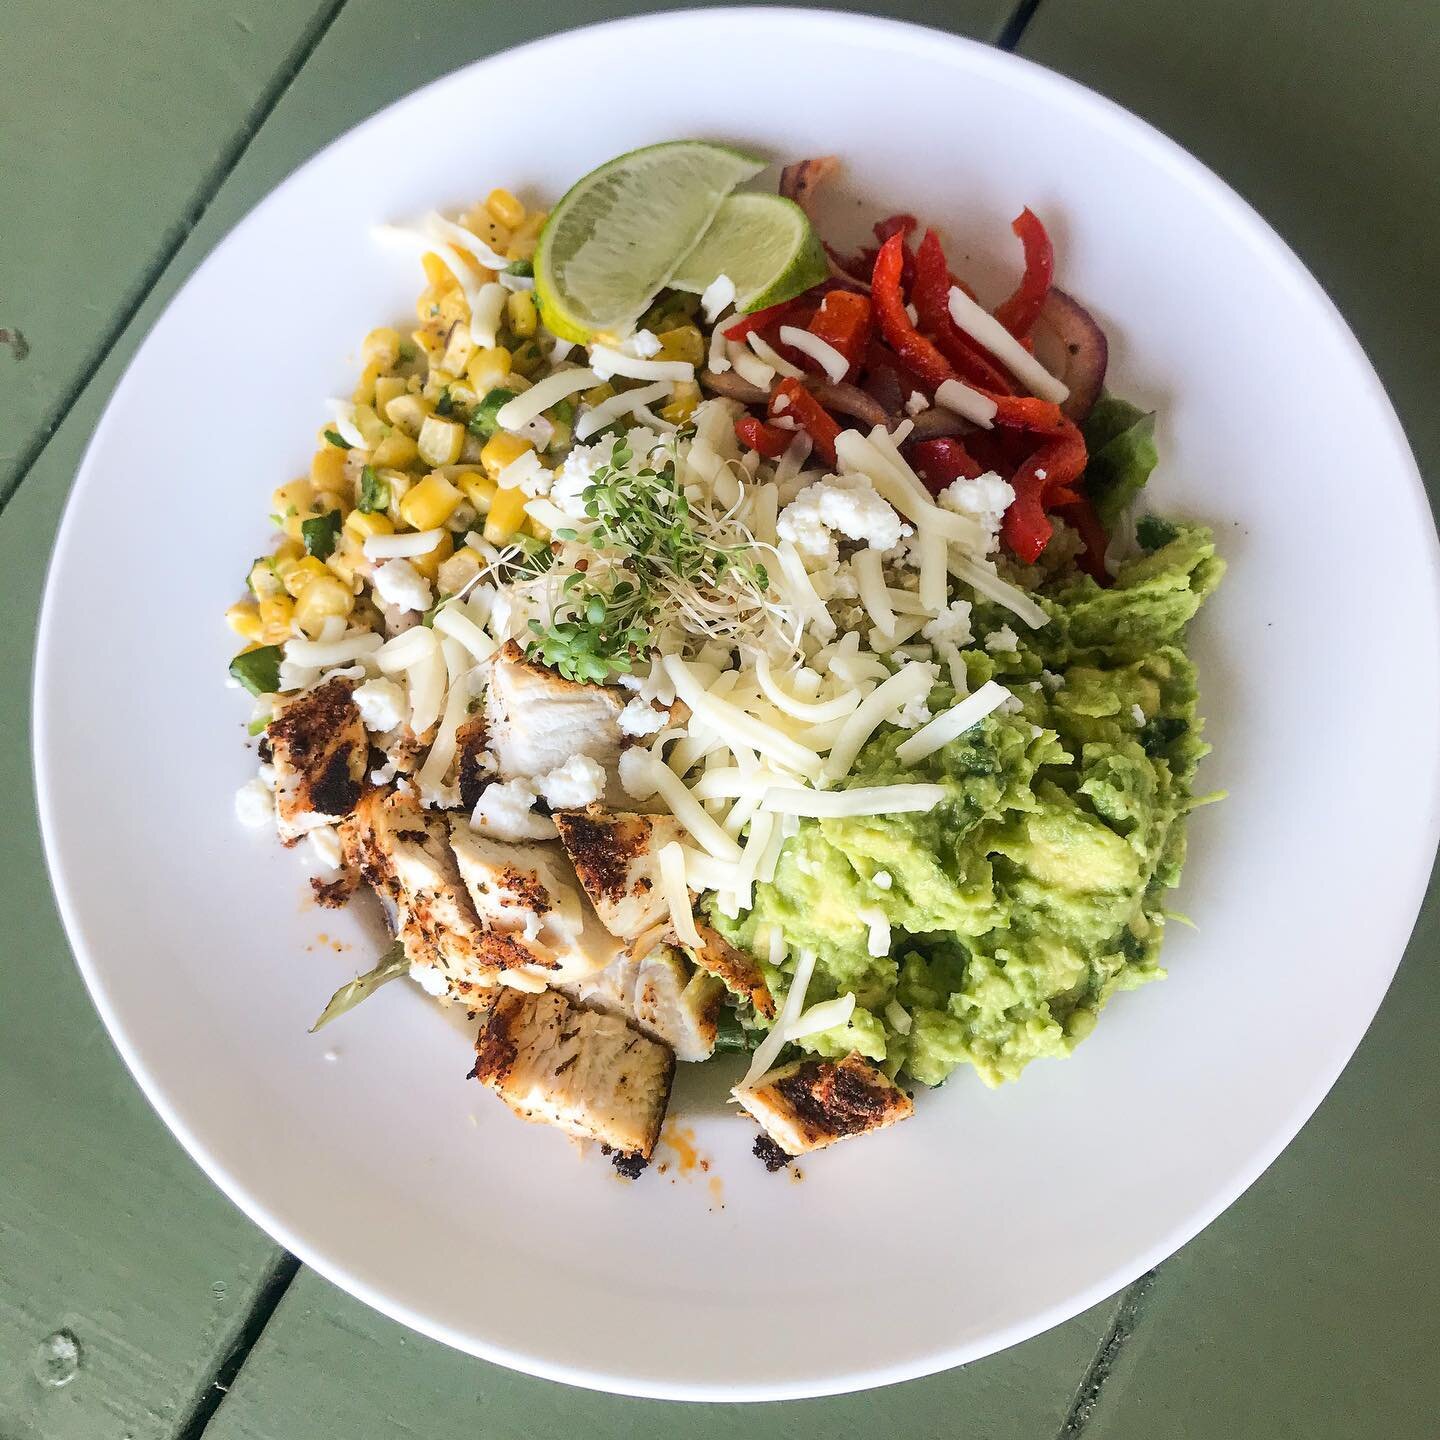 Protein Powered Hero Bowl is what&rsquo;s up! #deliciousfridays #fojaneatery #neverforget